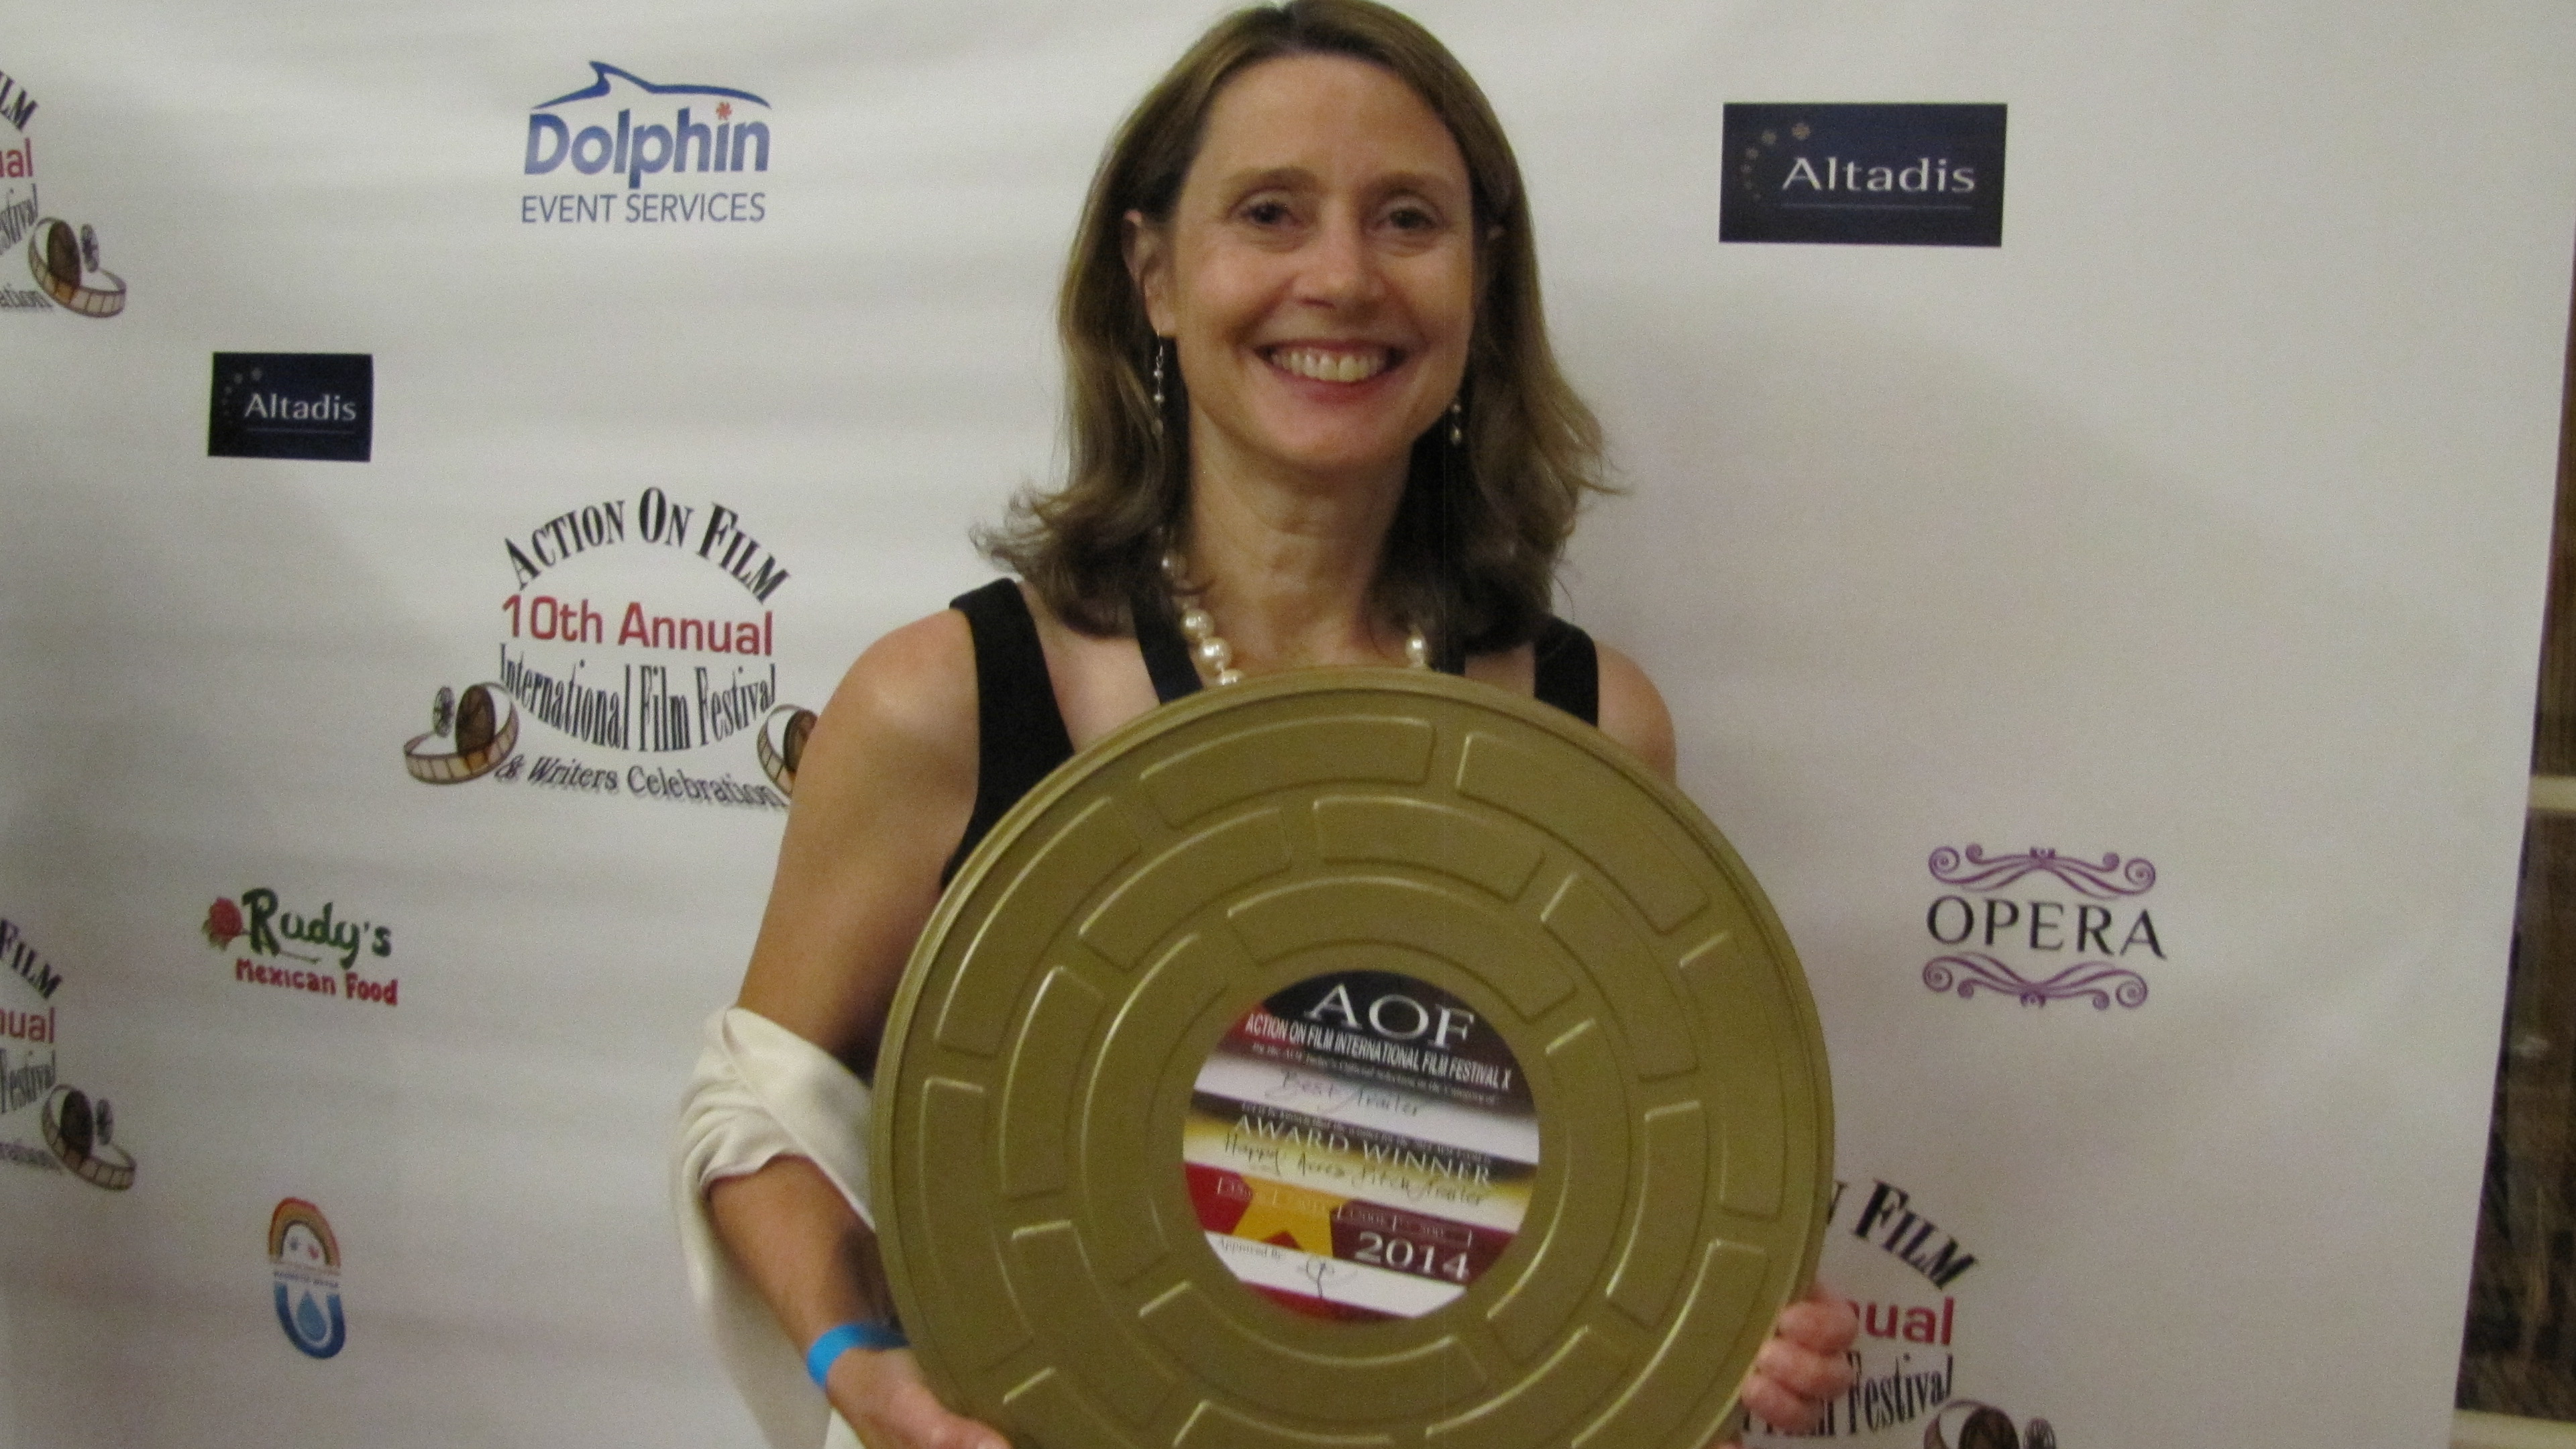 Colleen at the AOF with her award for 